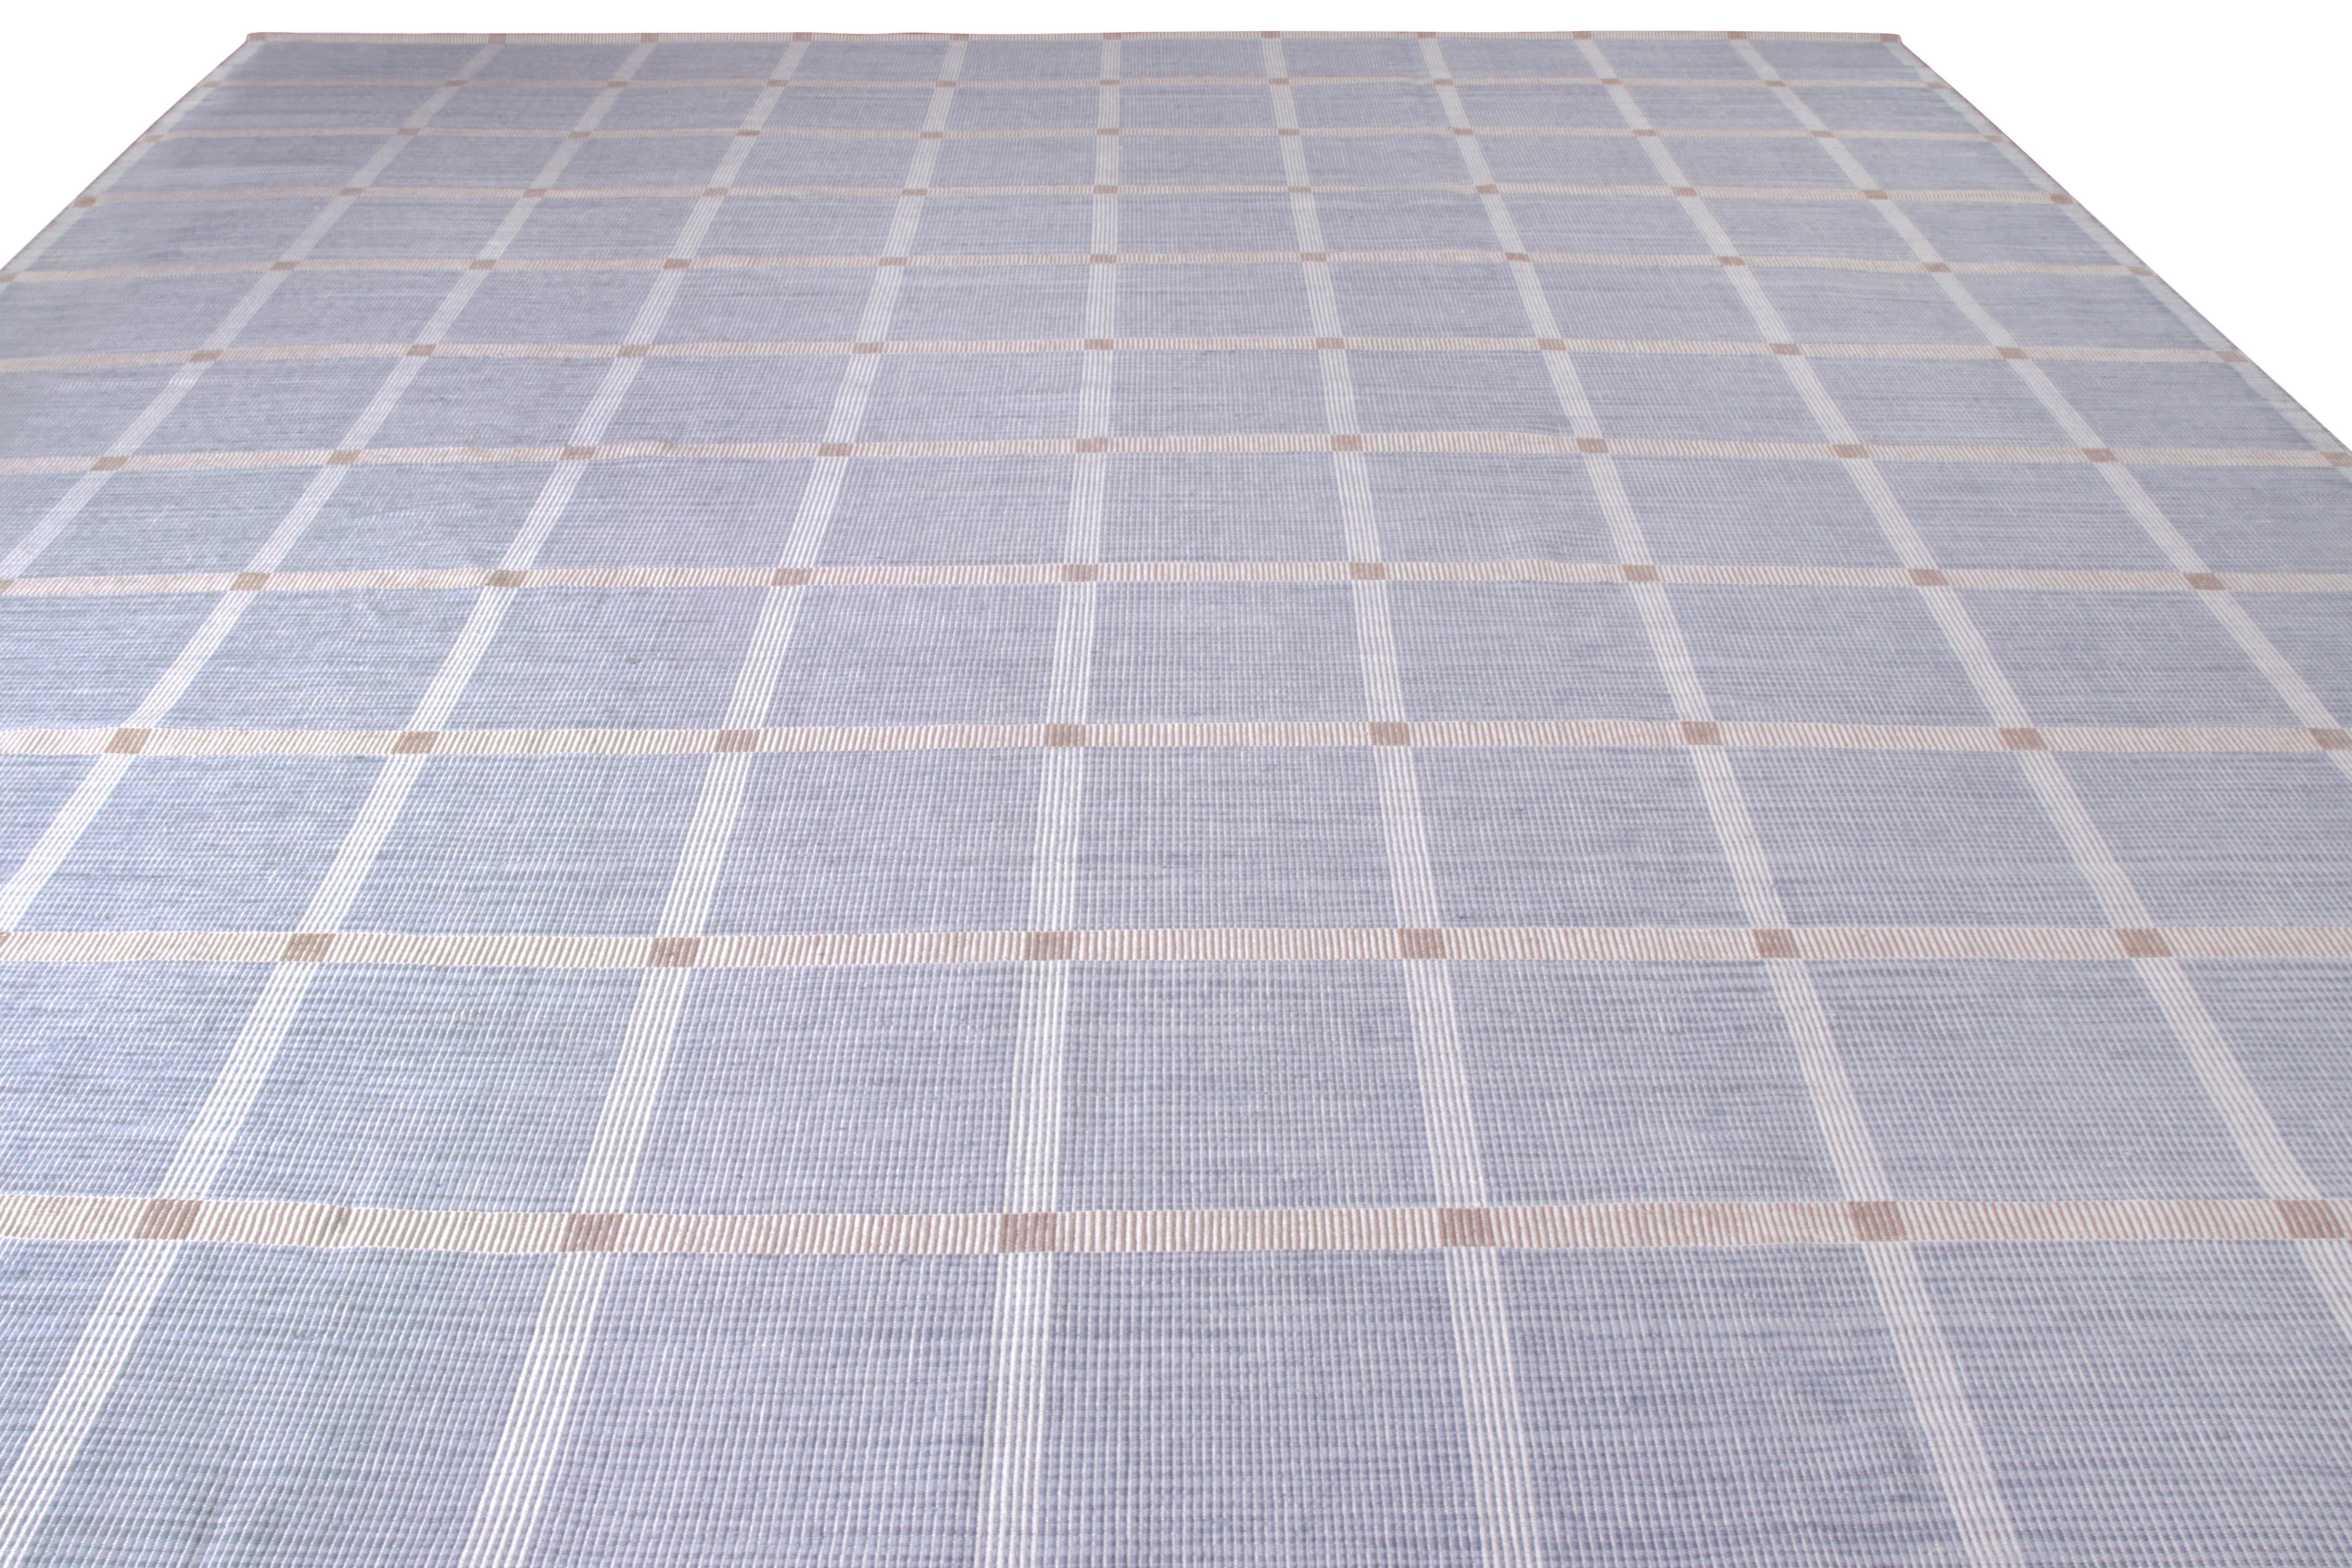 Handwoven with semi worsted wool, Rug & Kilim boasts its uniquely crafted Scandinavian style custom kilim rug that exudes phenomenal textural beauty—complementing its unique blue and white geometric pattern for a soothing sense of movement. Boasting